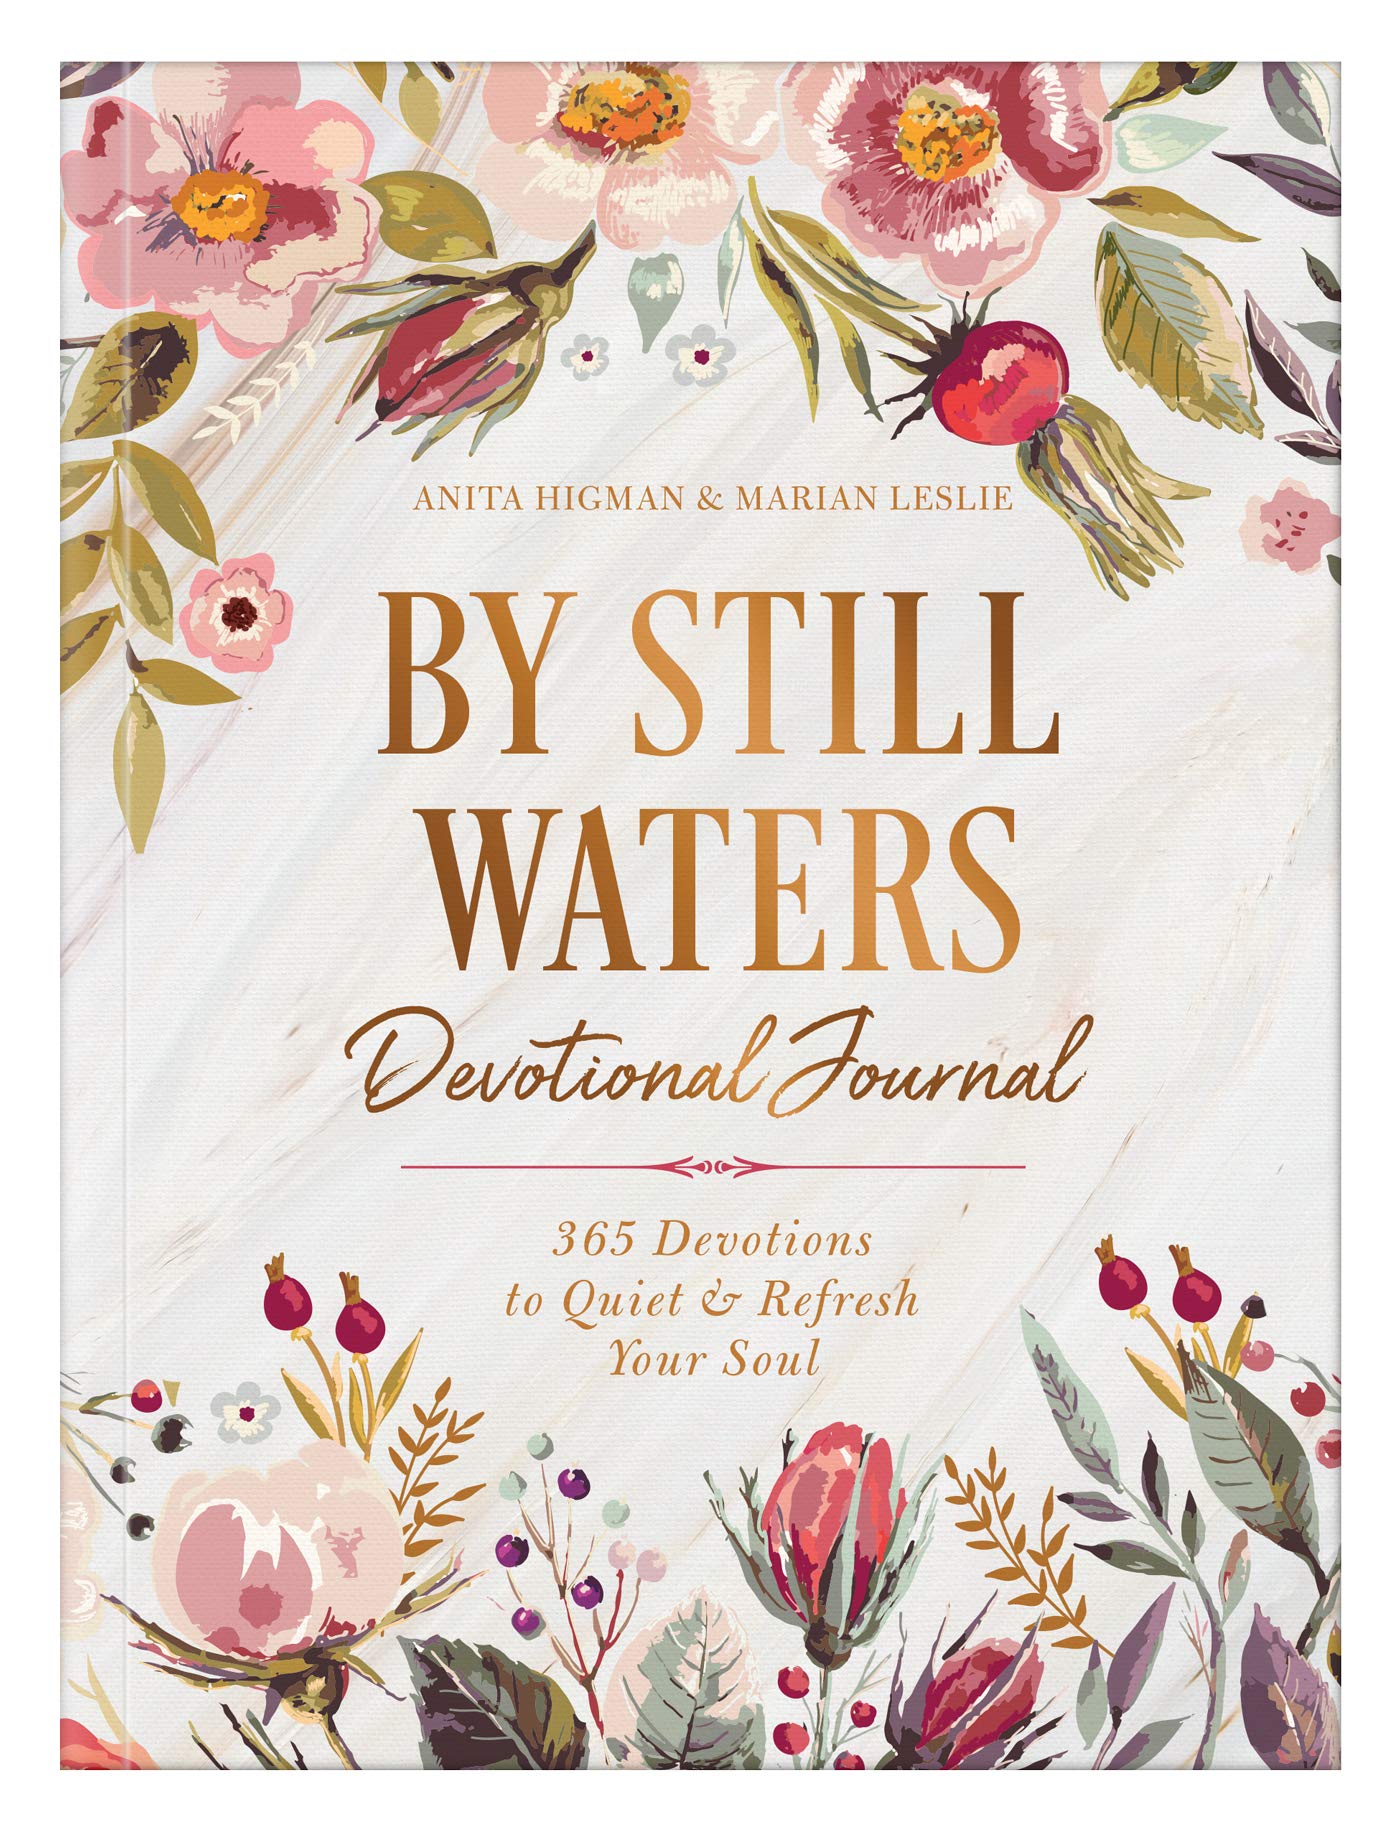 ROCKONLINE | By Still Waters Devotional Journal: 365 Devotions to Quiet and Refresh Your Soul | Anita Higman | New Creation Church | NCC | Joseph Prince | ROCK Bookshop | ROCK Bookstore | Star Vista | Free delivery for Singapore Orders above $50.